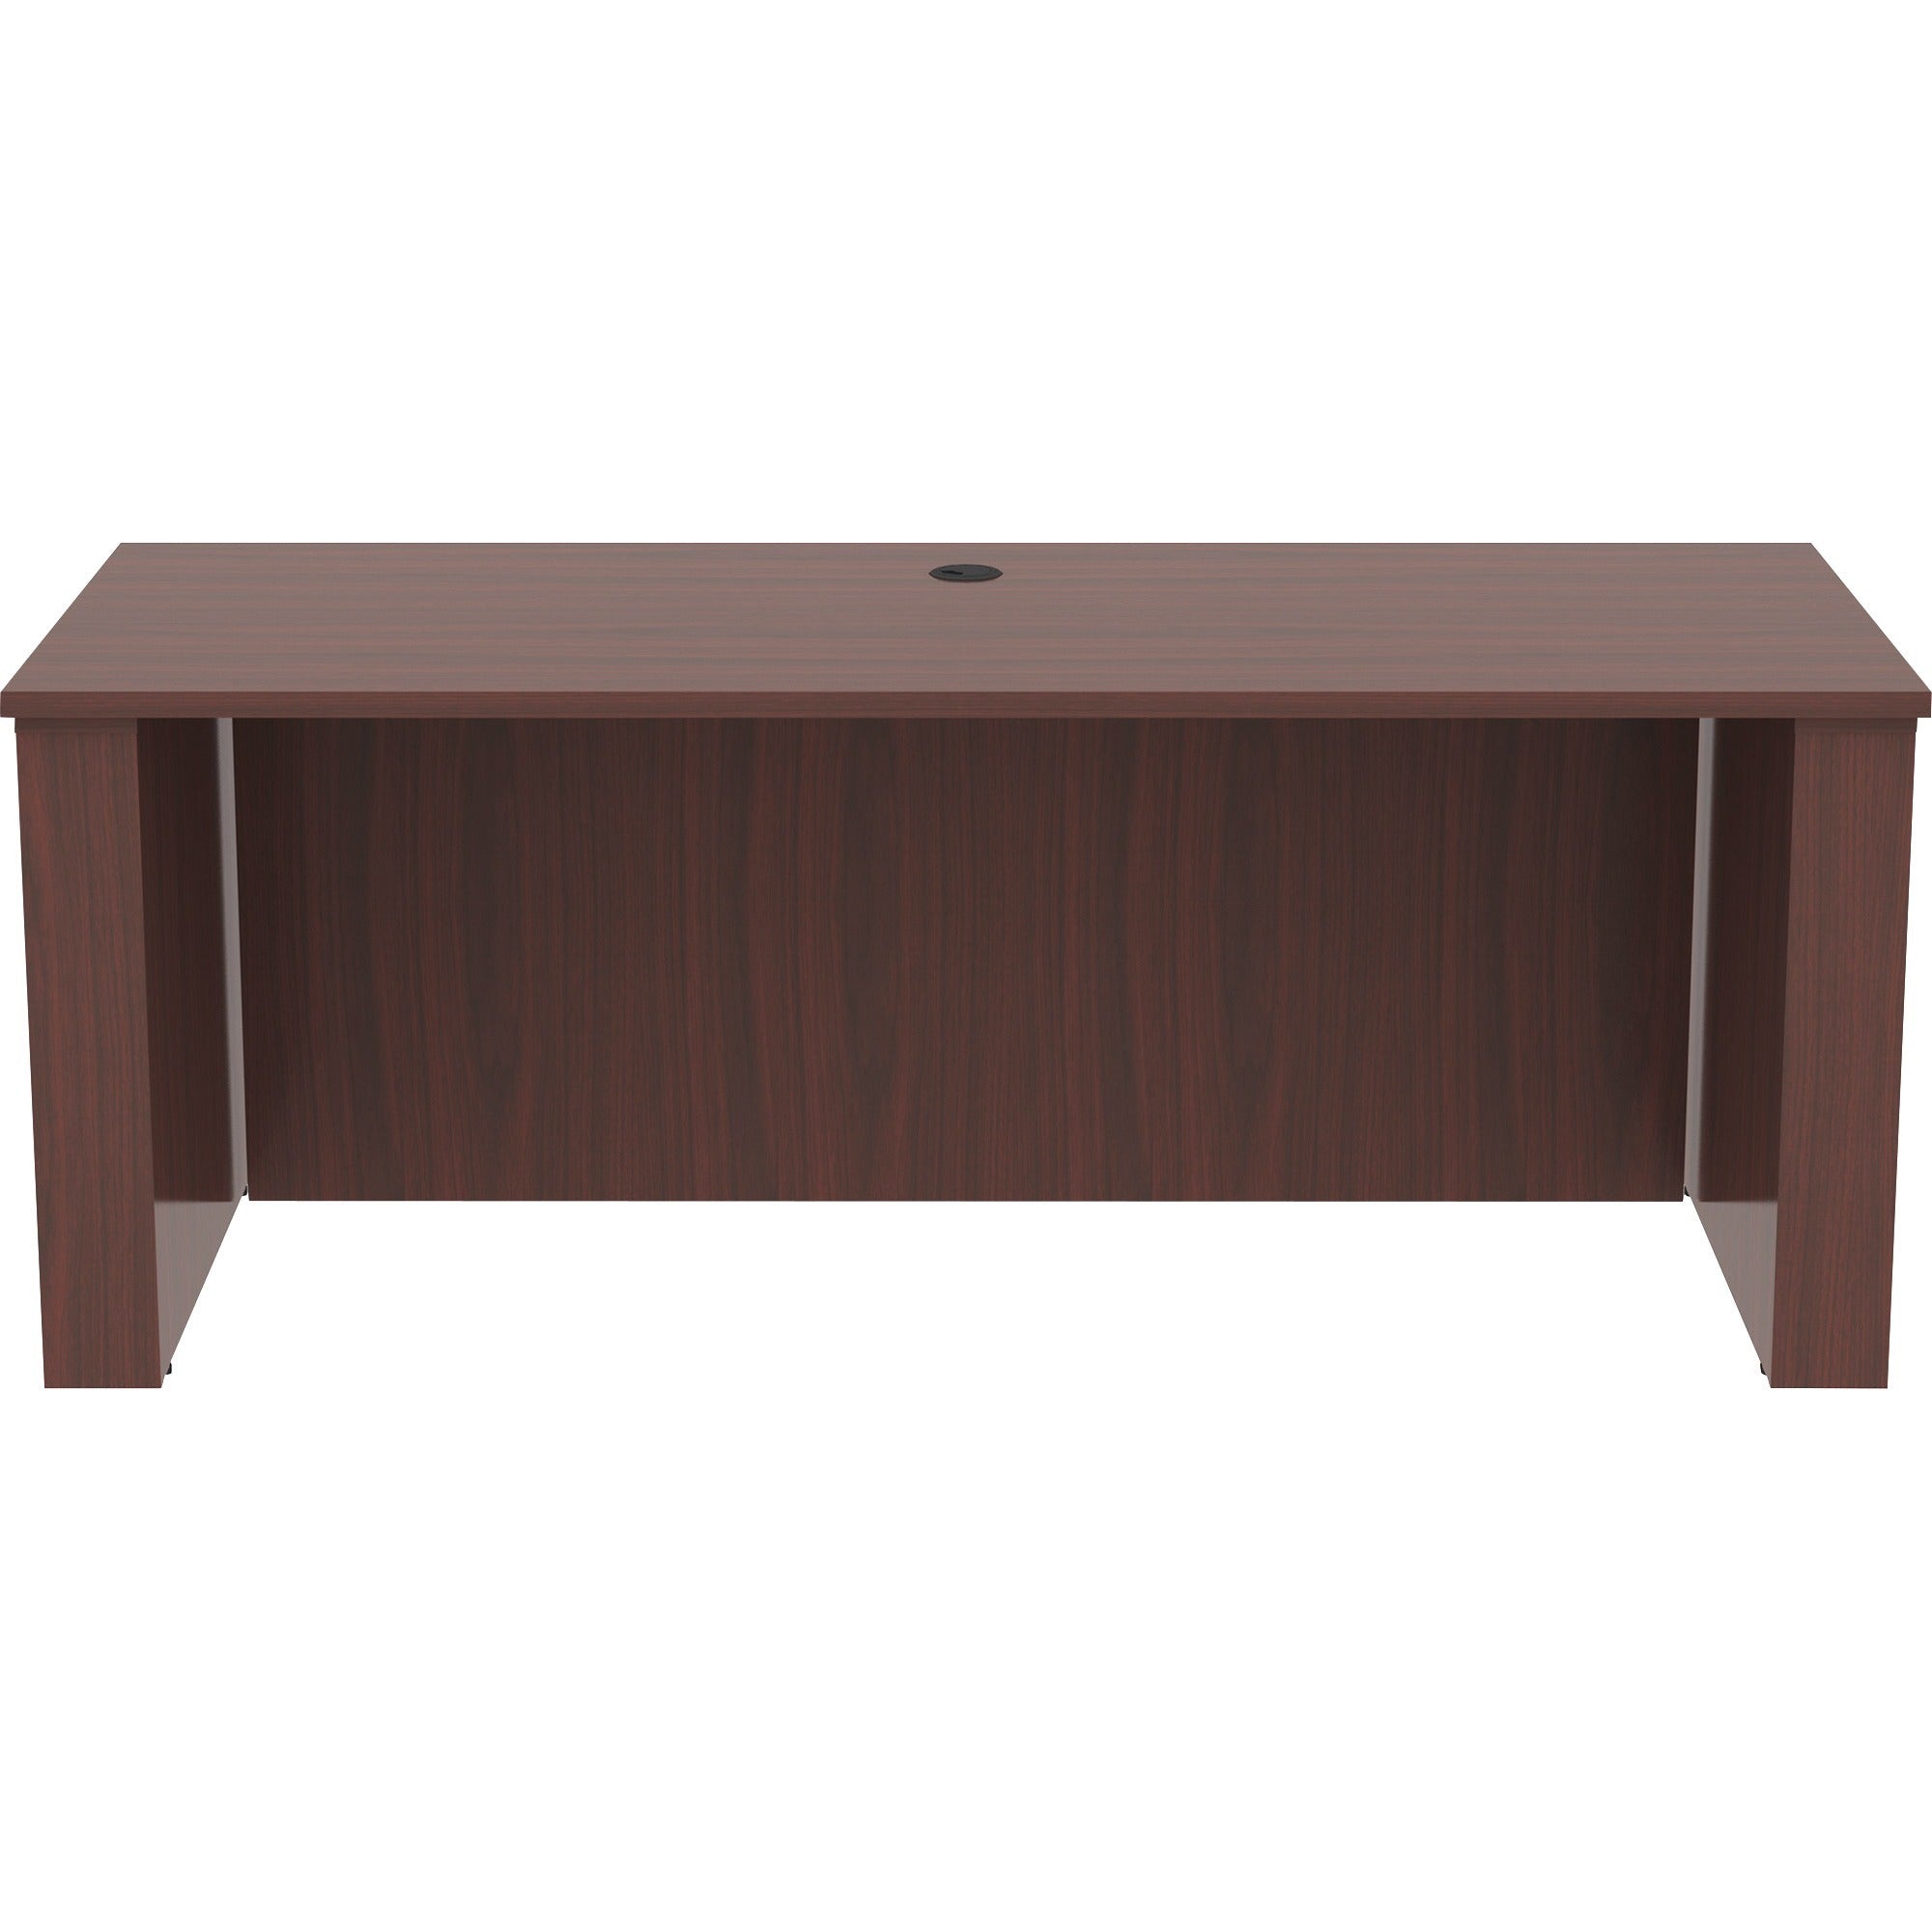 lorell-essentials-series-sit-to-stand-desk-shell-01-top-1-edge-72-x-2949-finish-mahogany-laminate-table-top_llr69574 - 2